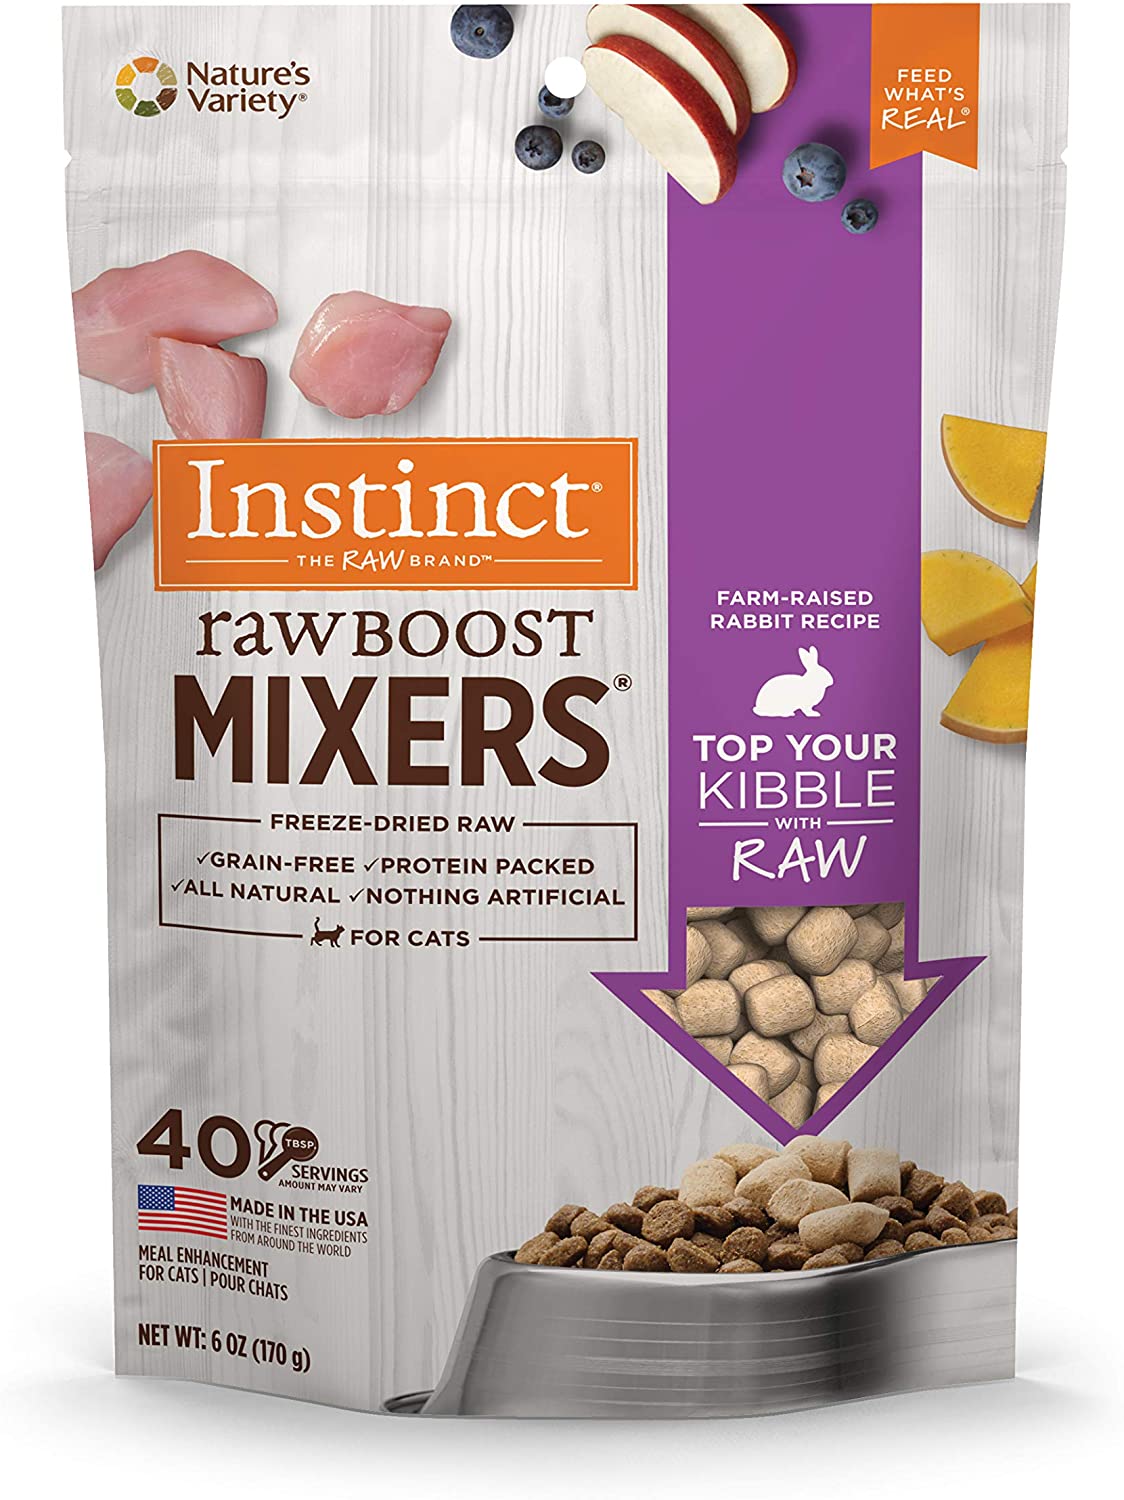 Frozen & Raw Cat Food olliepets.co.uk